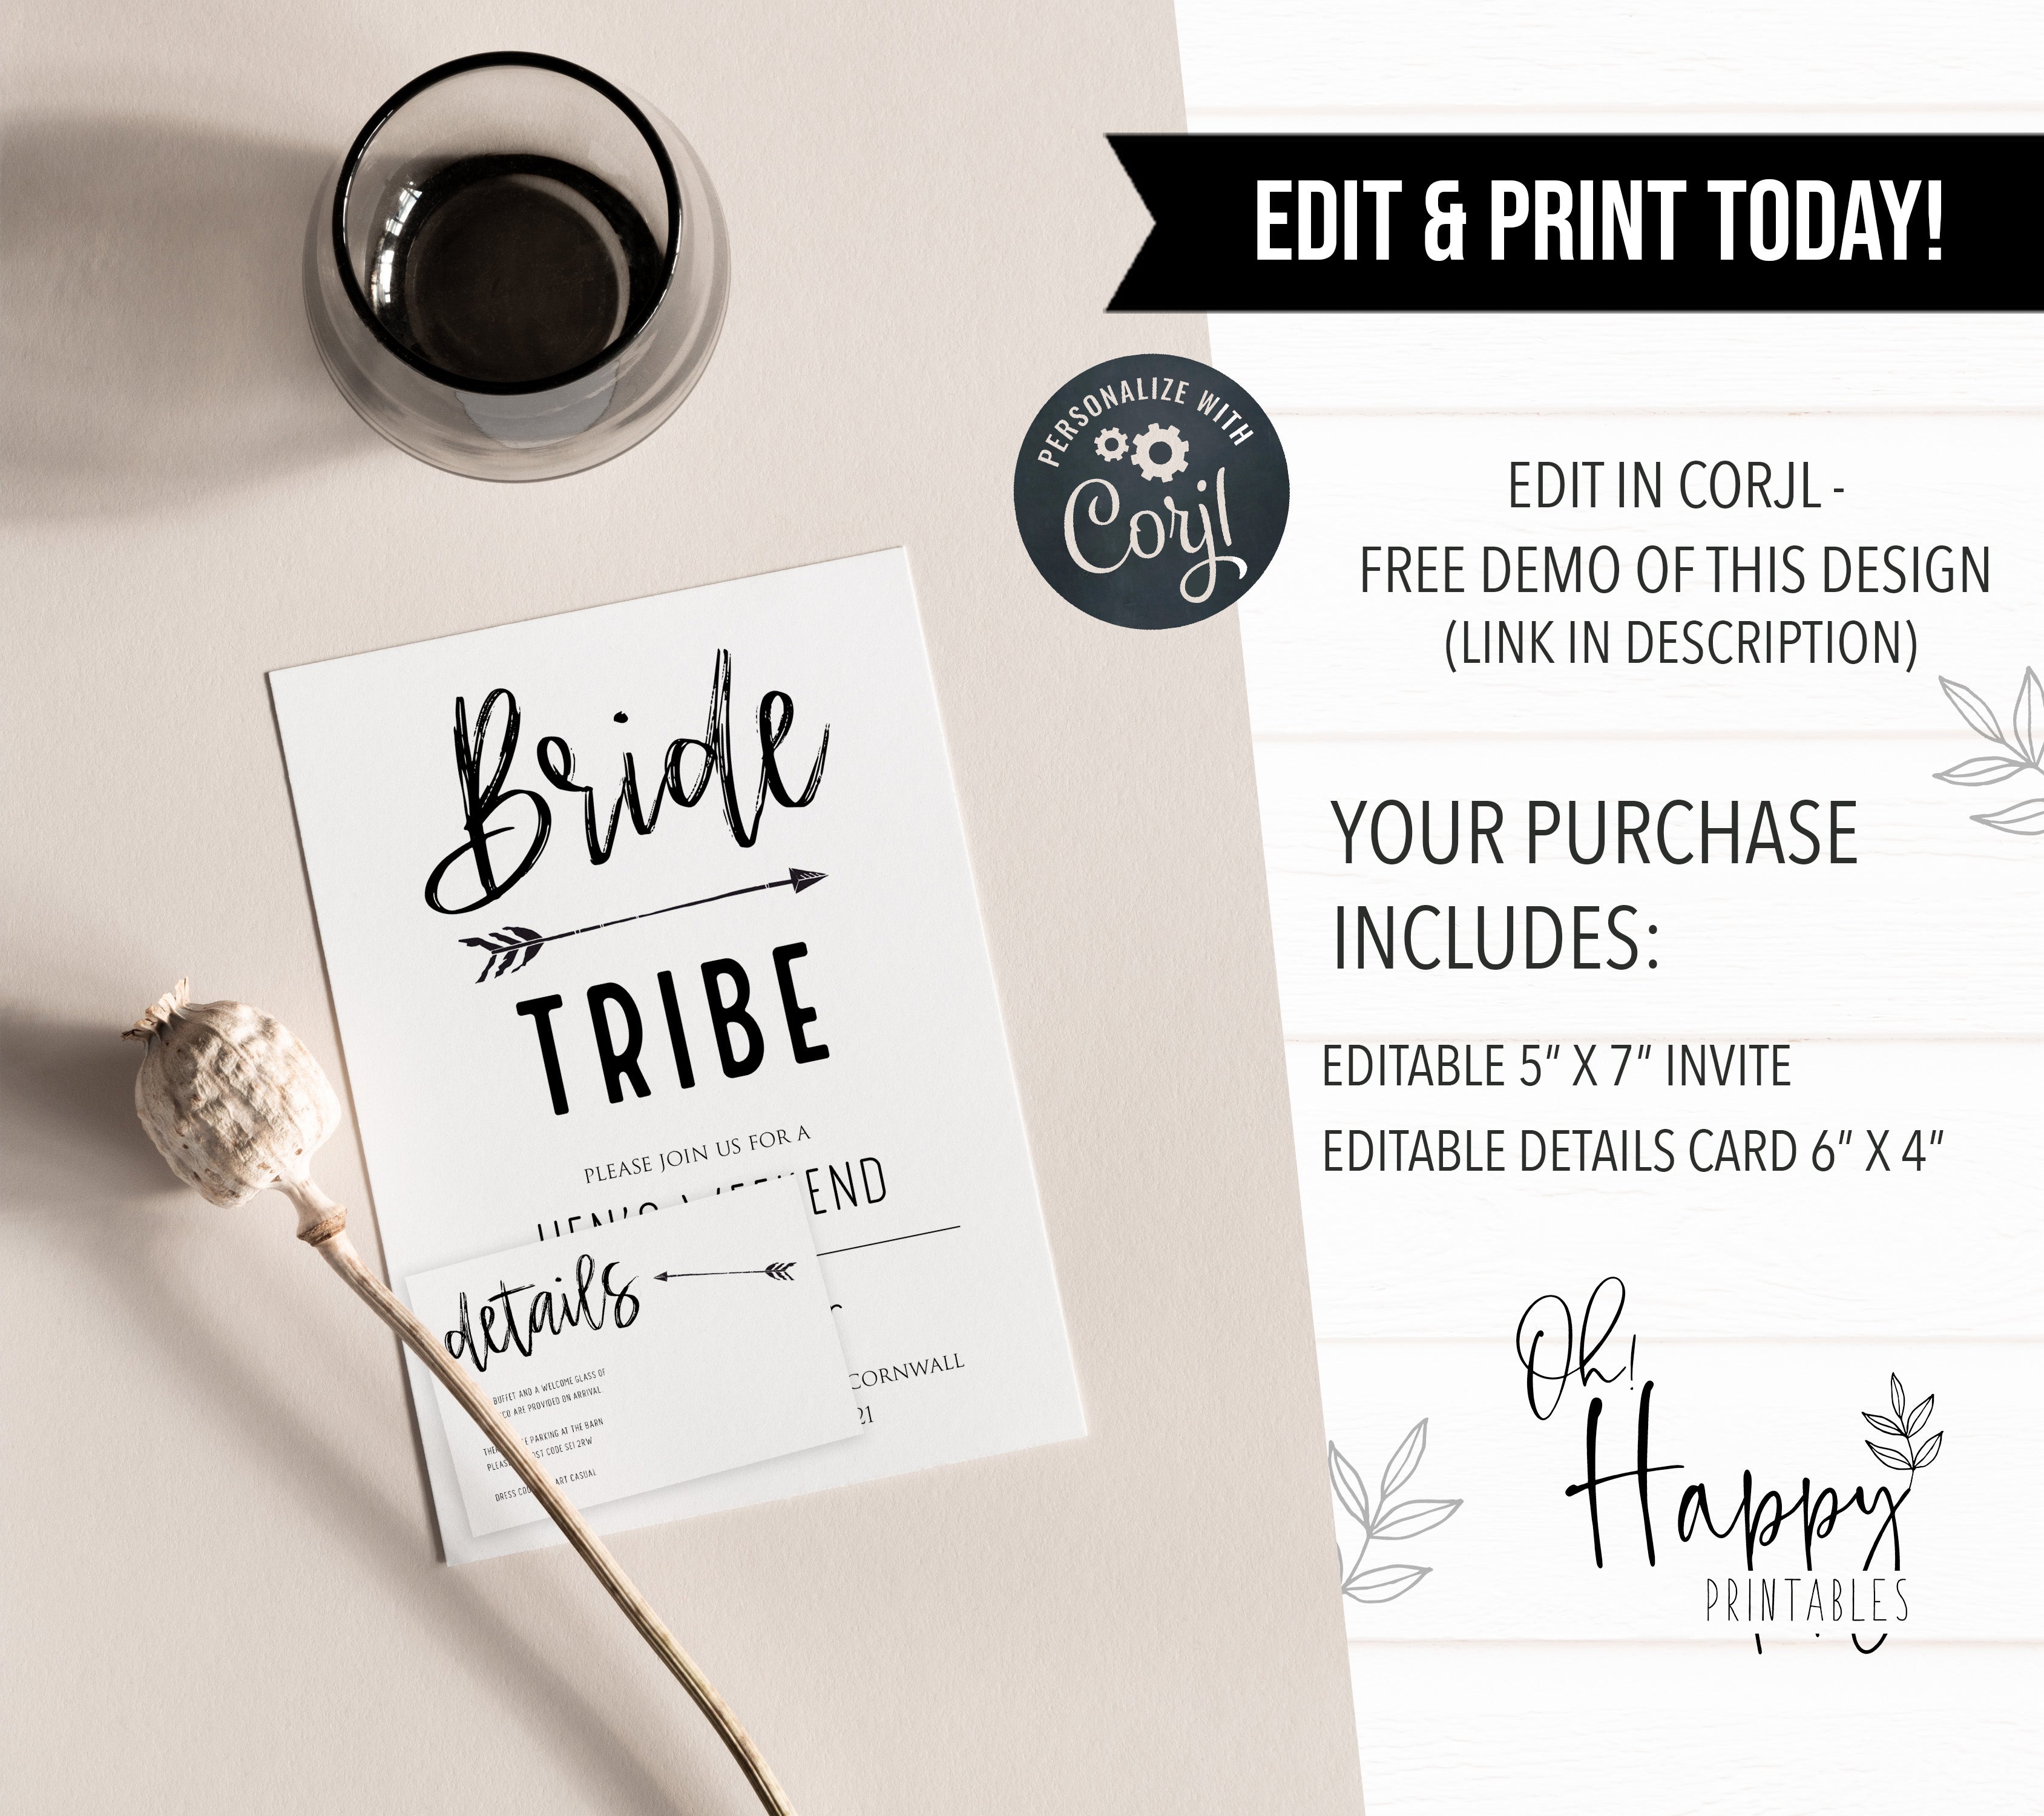 hen party weekend invitation, bride tribe bachelorette invitations, printable bachelorette invitations, editable bachelorette invitations, bride tribe bridal theme